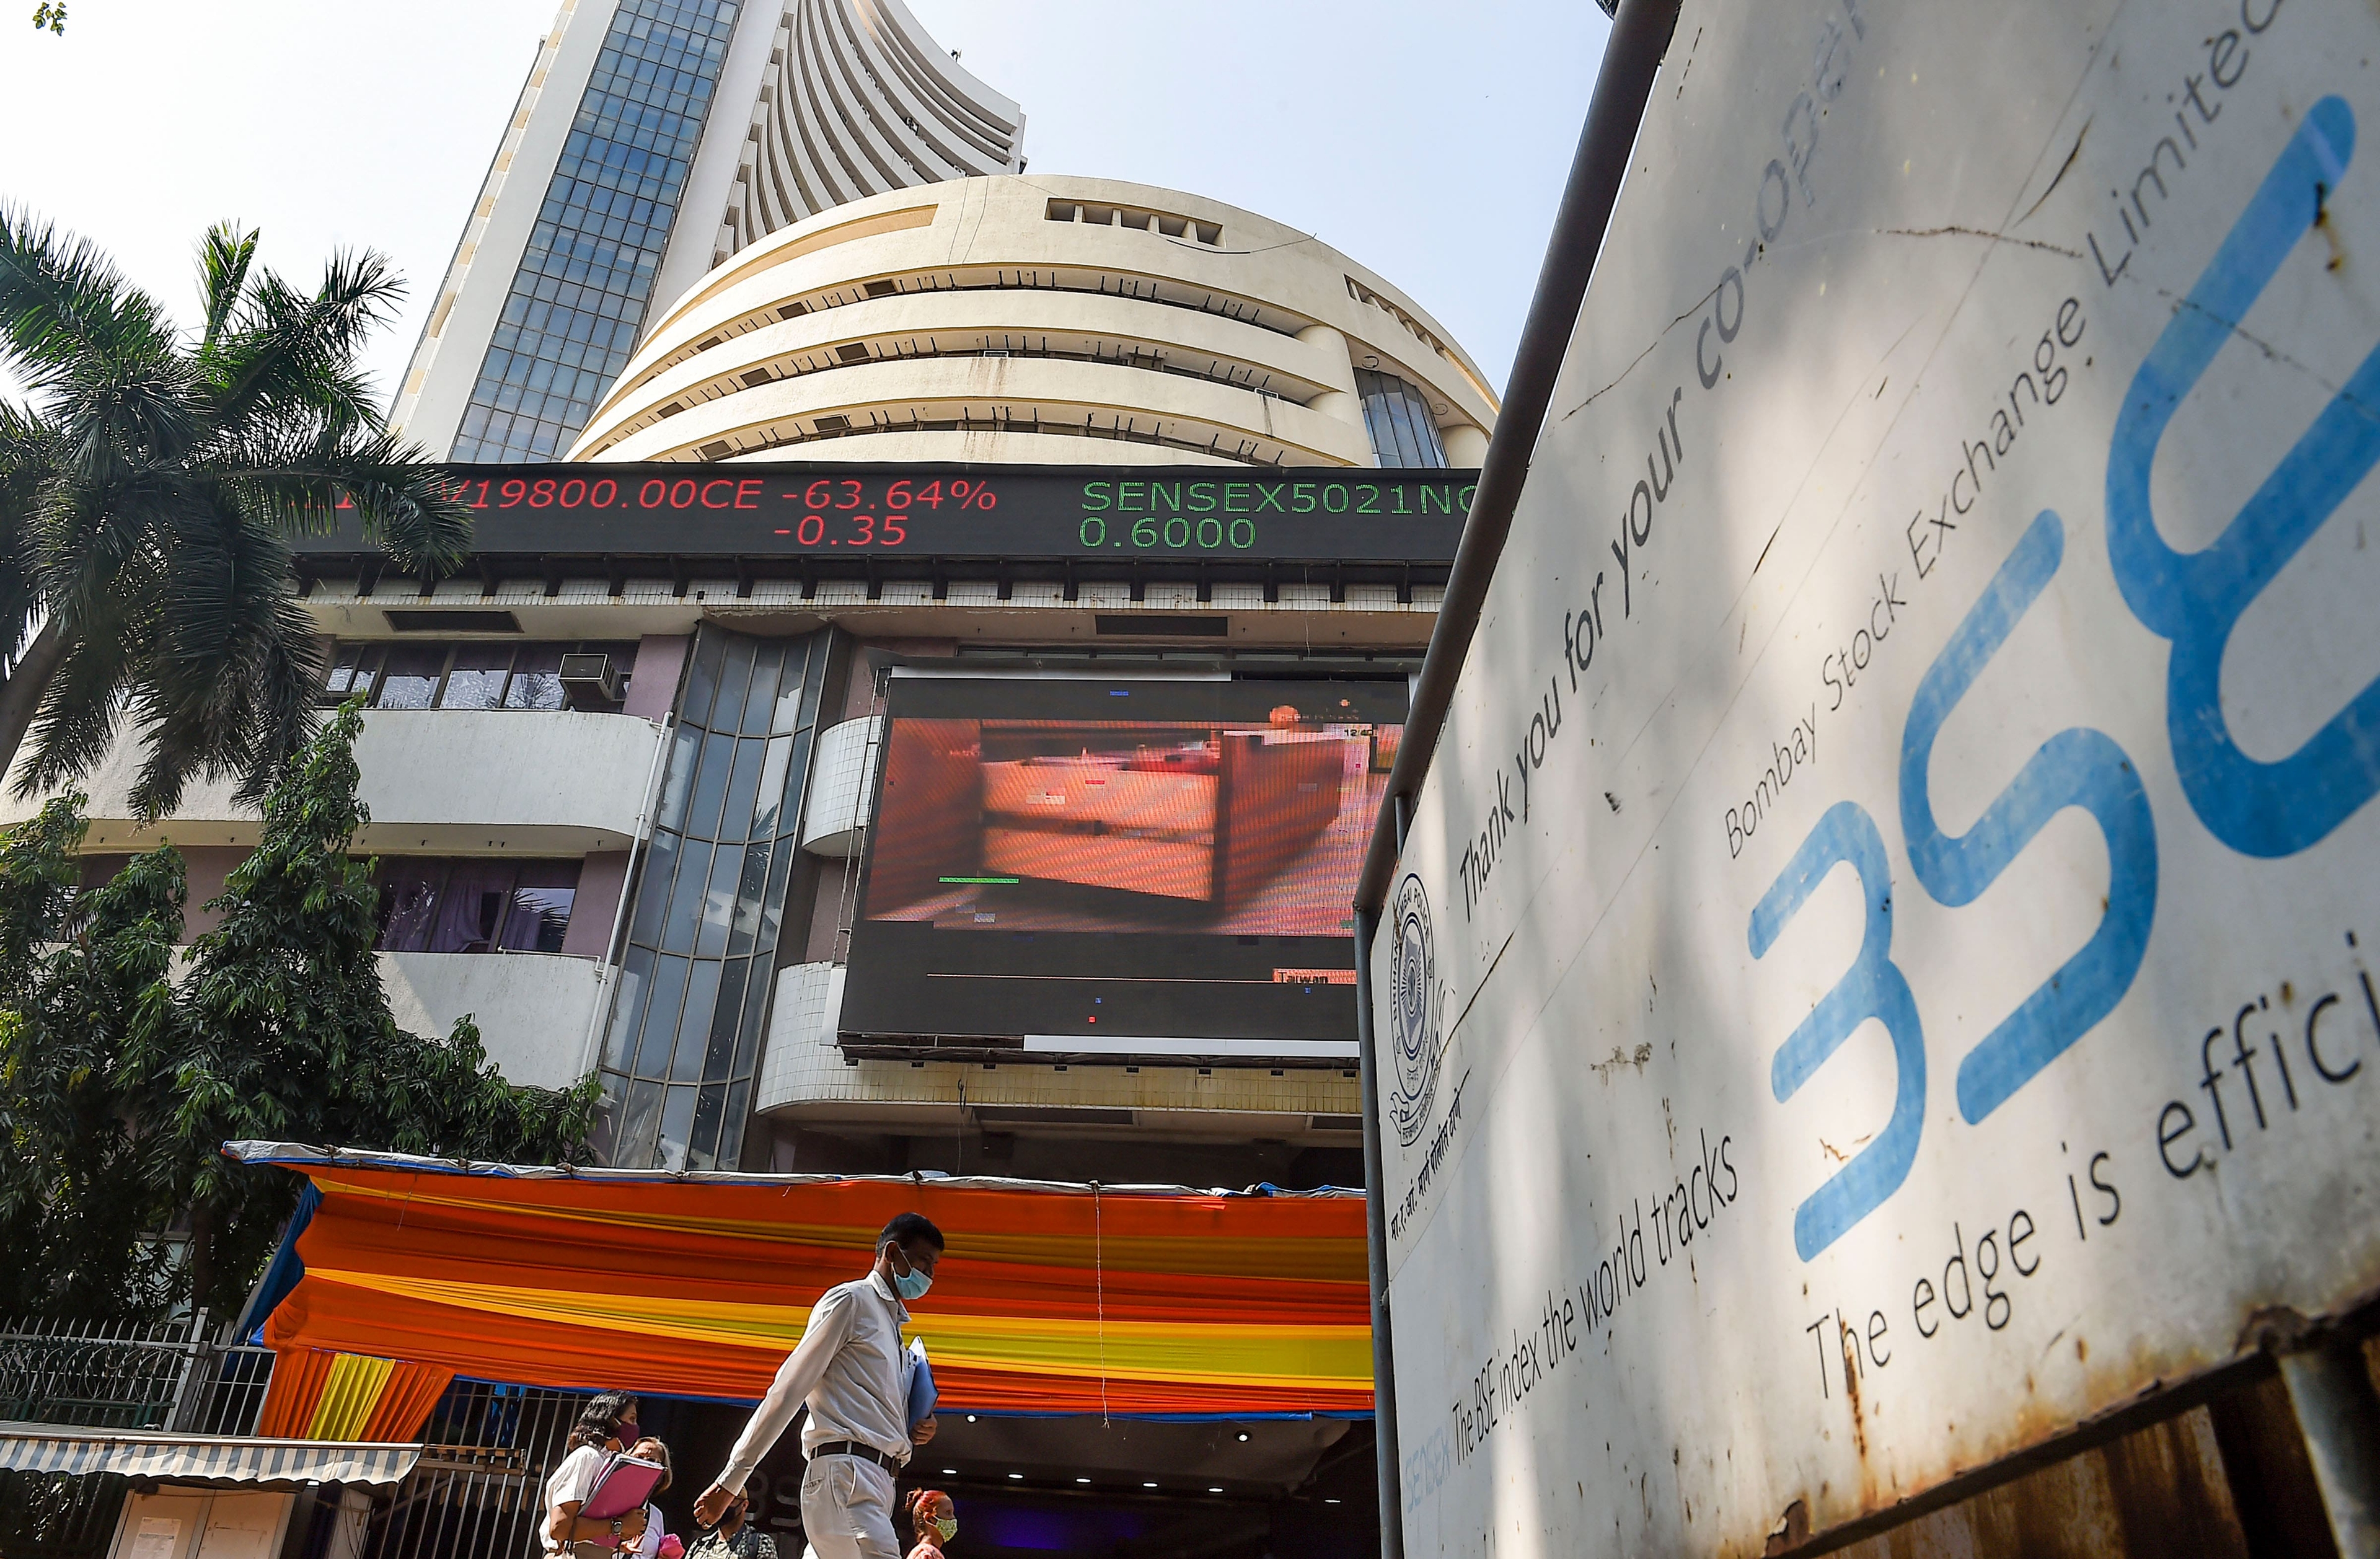 Indian indices surged around 1.5 percent on Tuesday snapping 2 sessions of losses amid a broad-based rally across global peers. The Sensex ended 777 points higher at 57,357, while the broader Nifty rose 247 points to settle at 17,210.